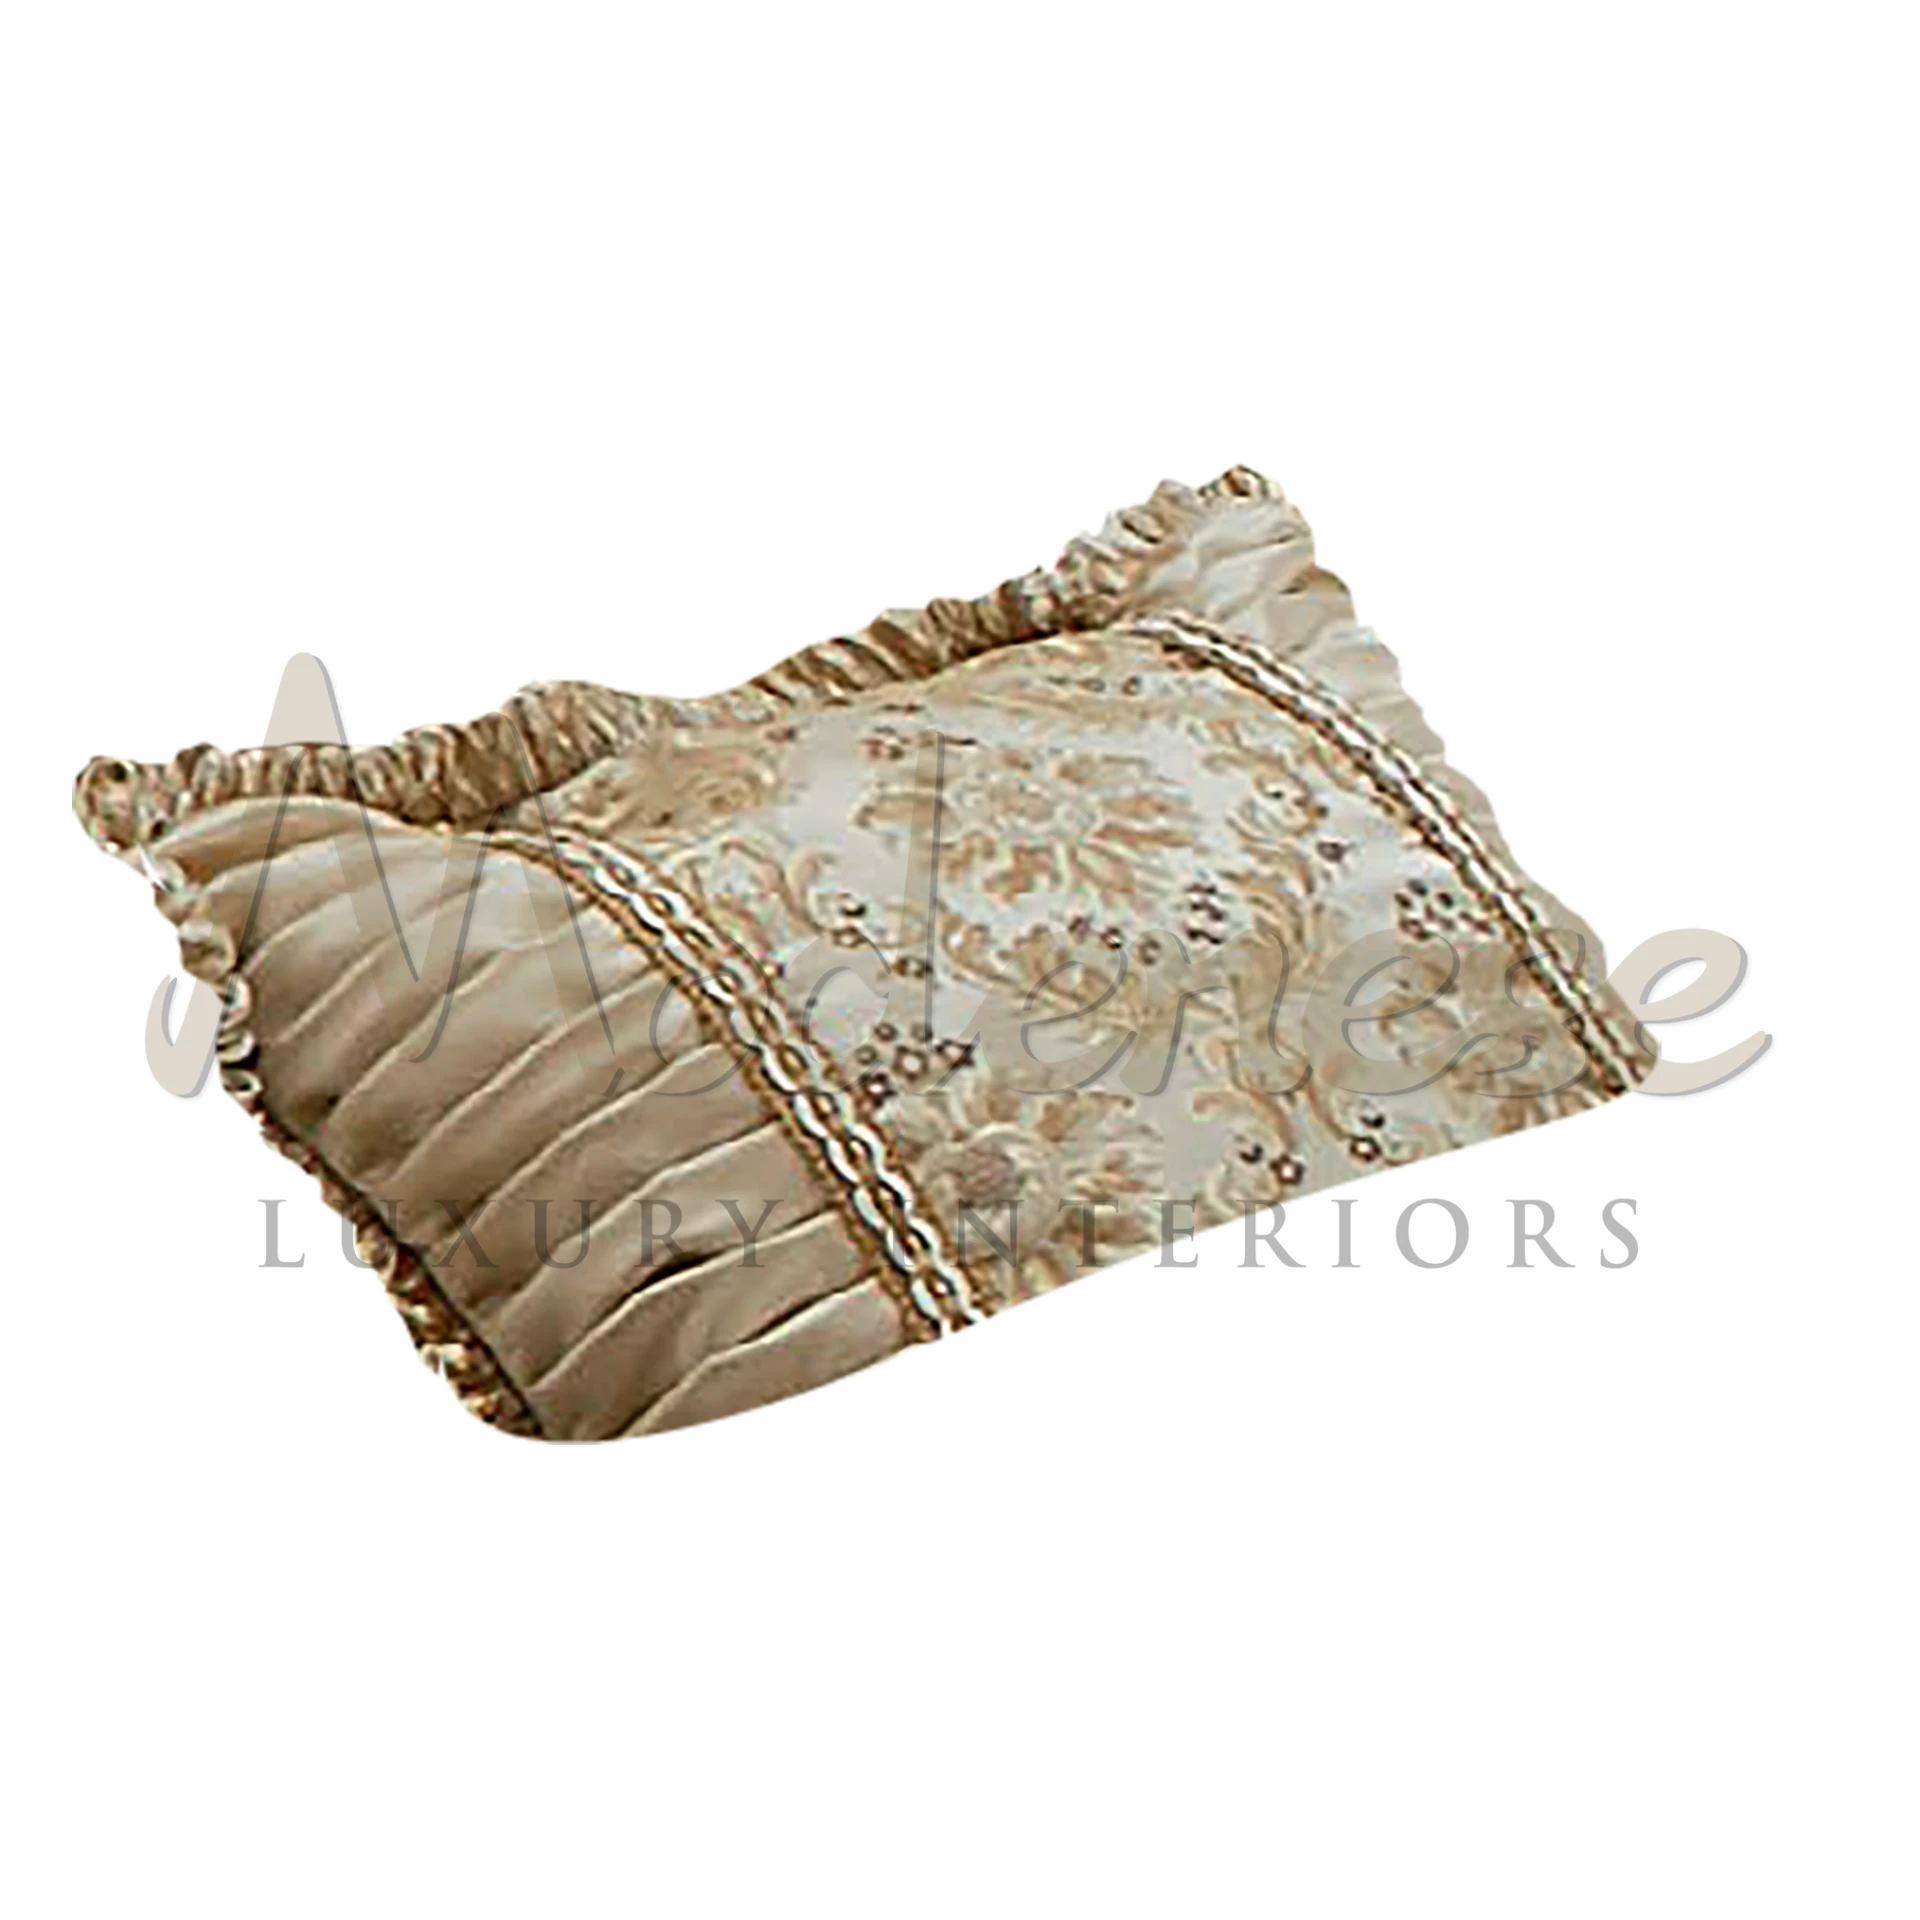 Elegant Designer Pillow by Modenese, a symbol of luxury and sophistication, enhancing the living space with its beauty.